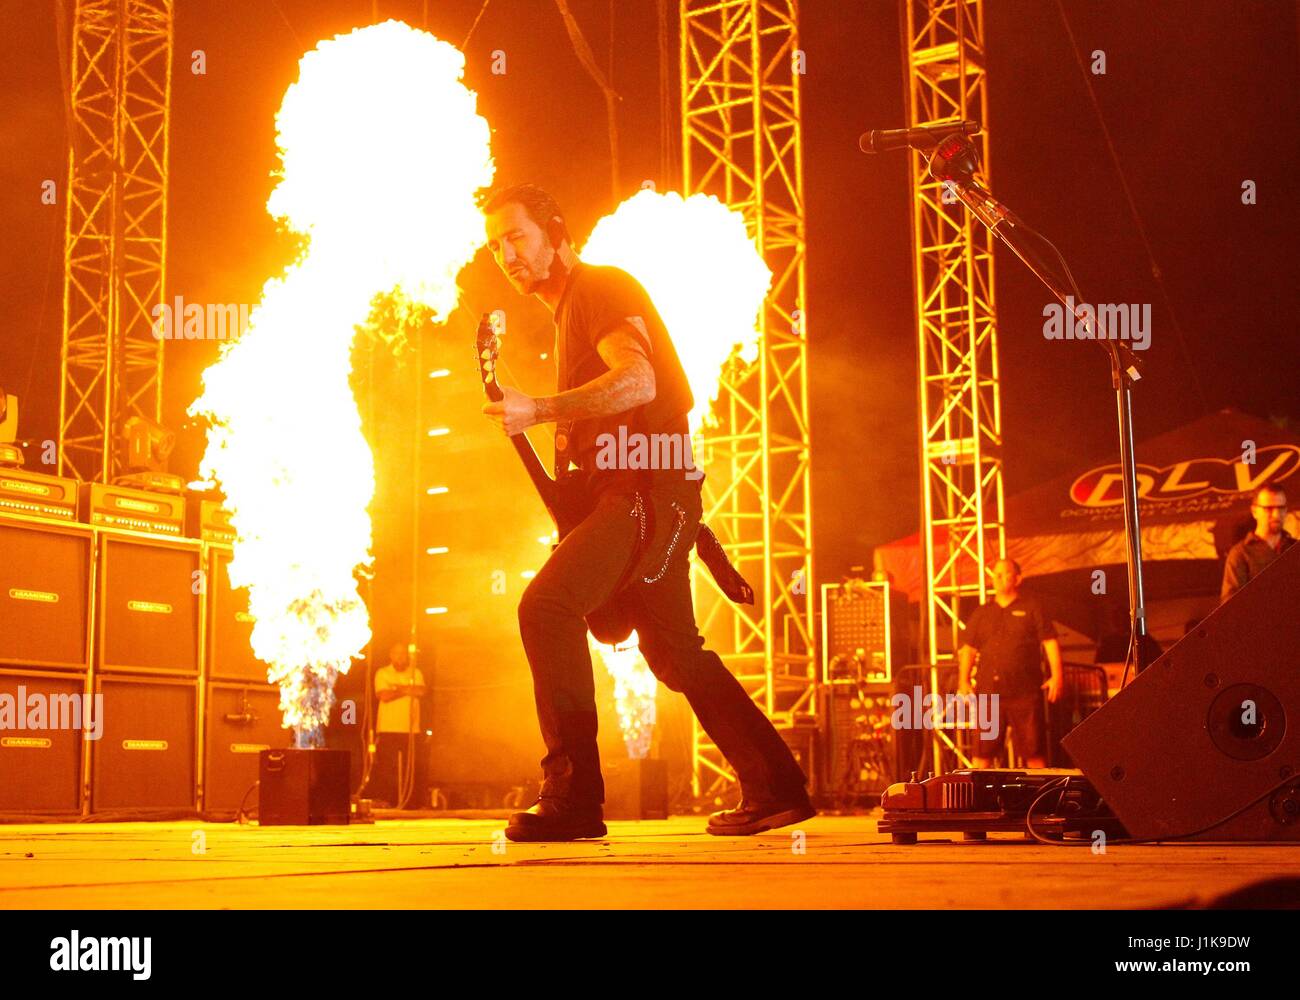 Sully Erna Stock Photos & Sully Erna Stock Images - Alamy